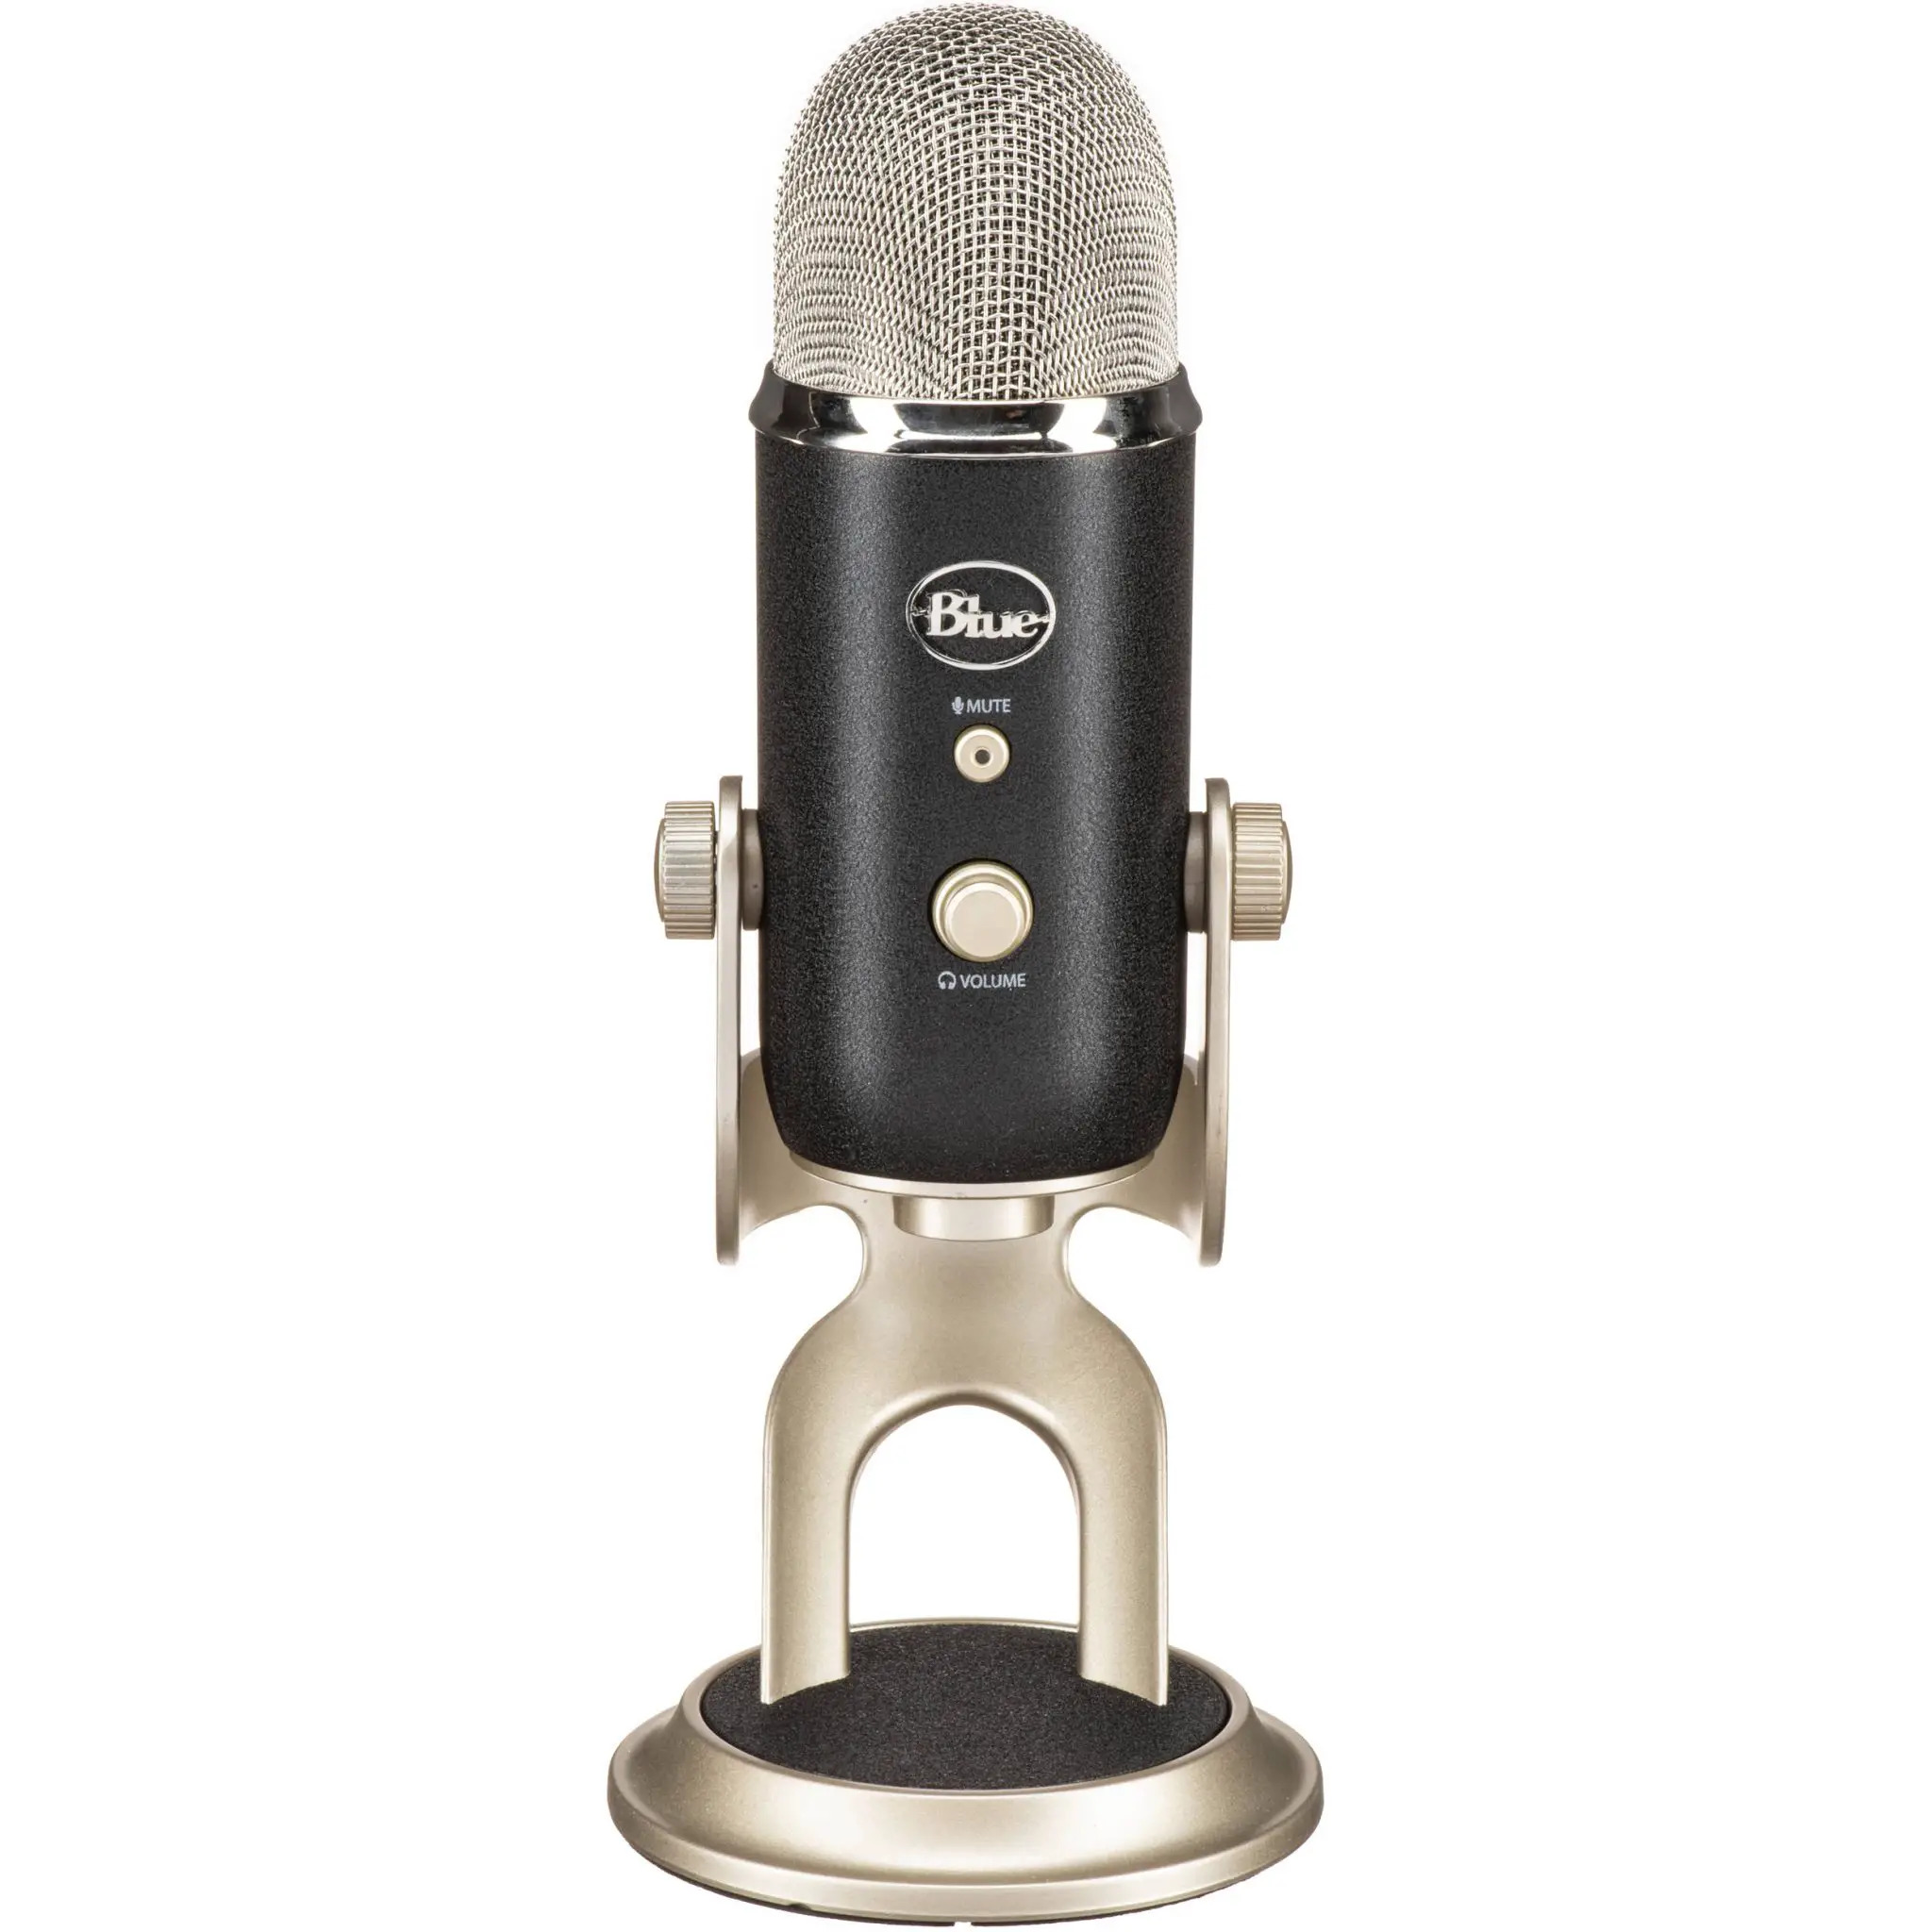 Ultimate USB and XLR Microphone for Professional Recording